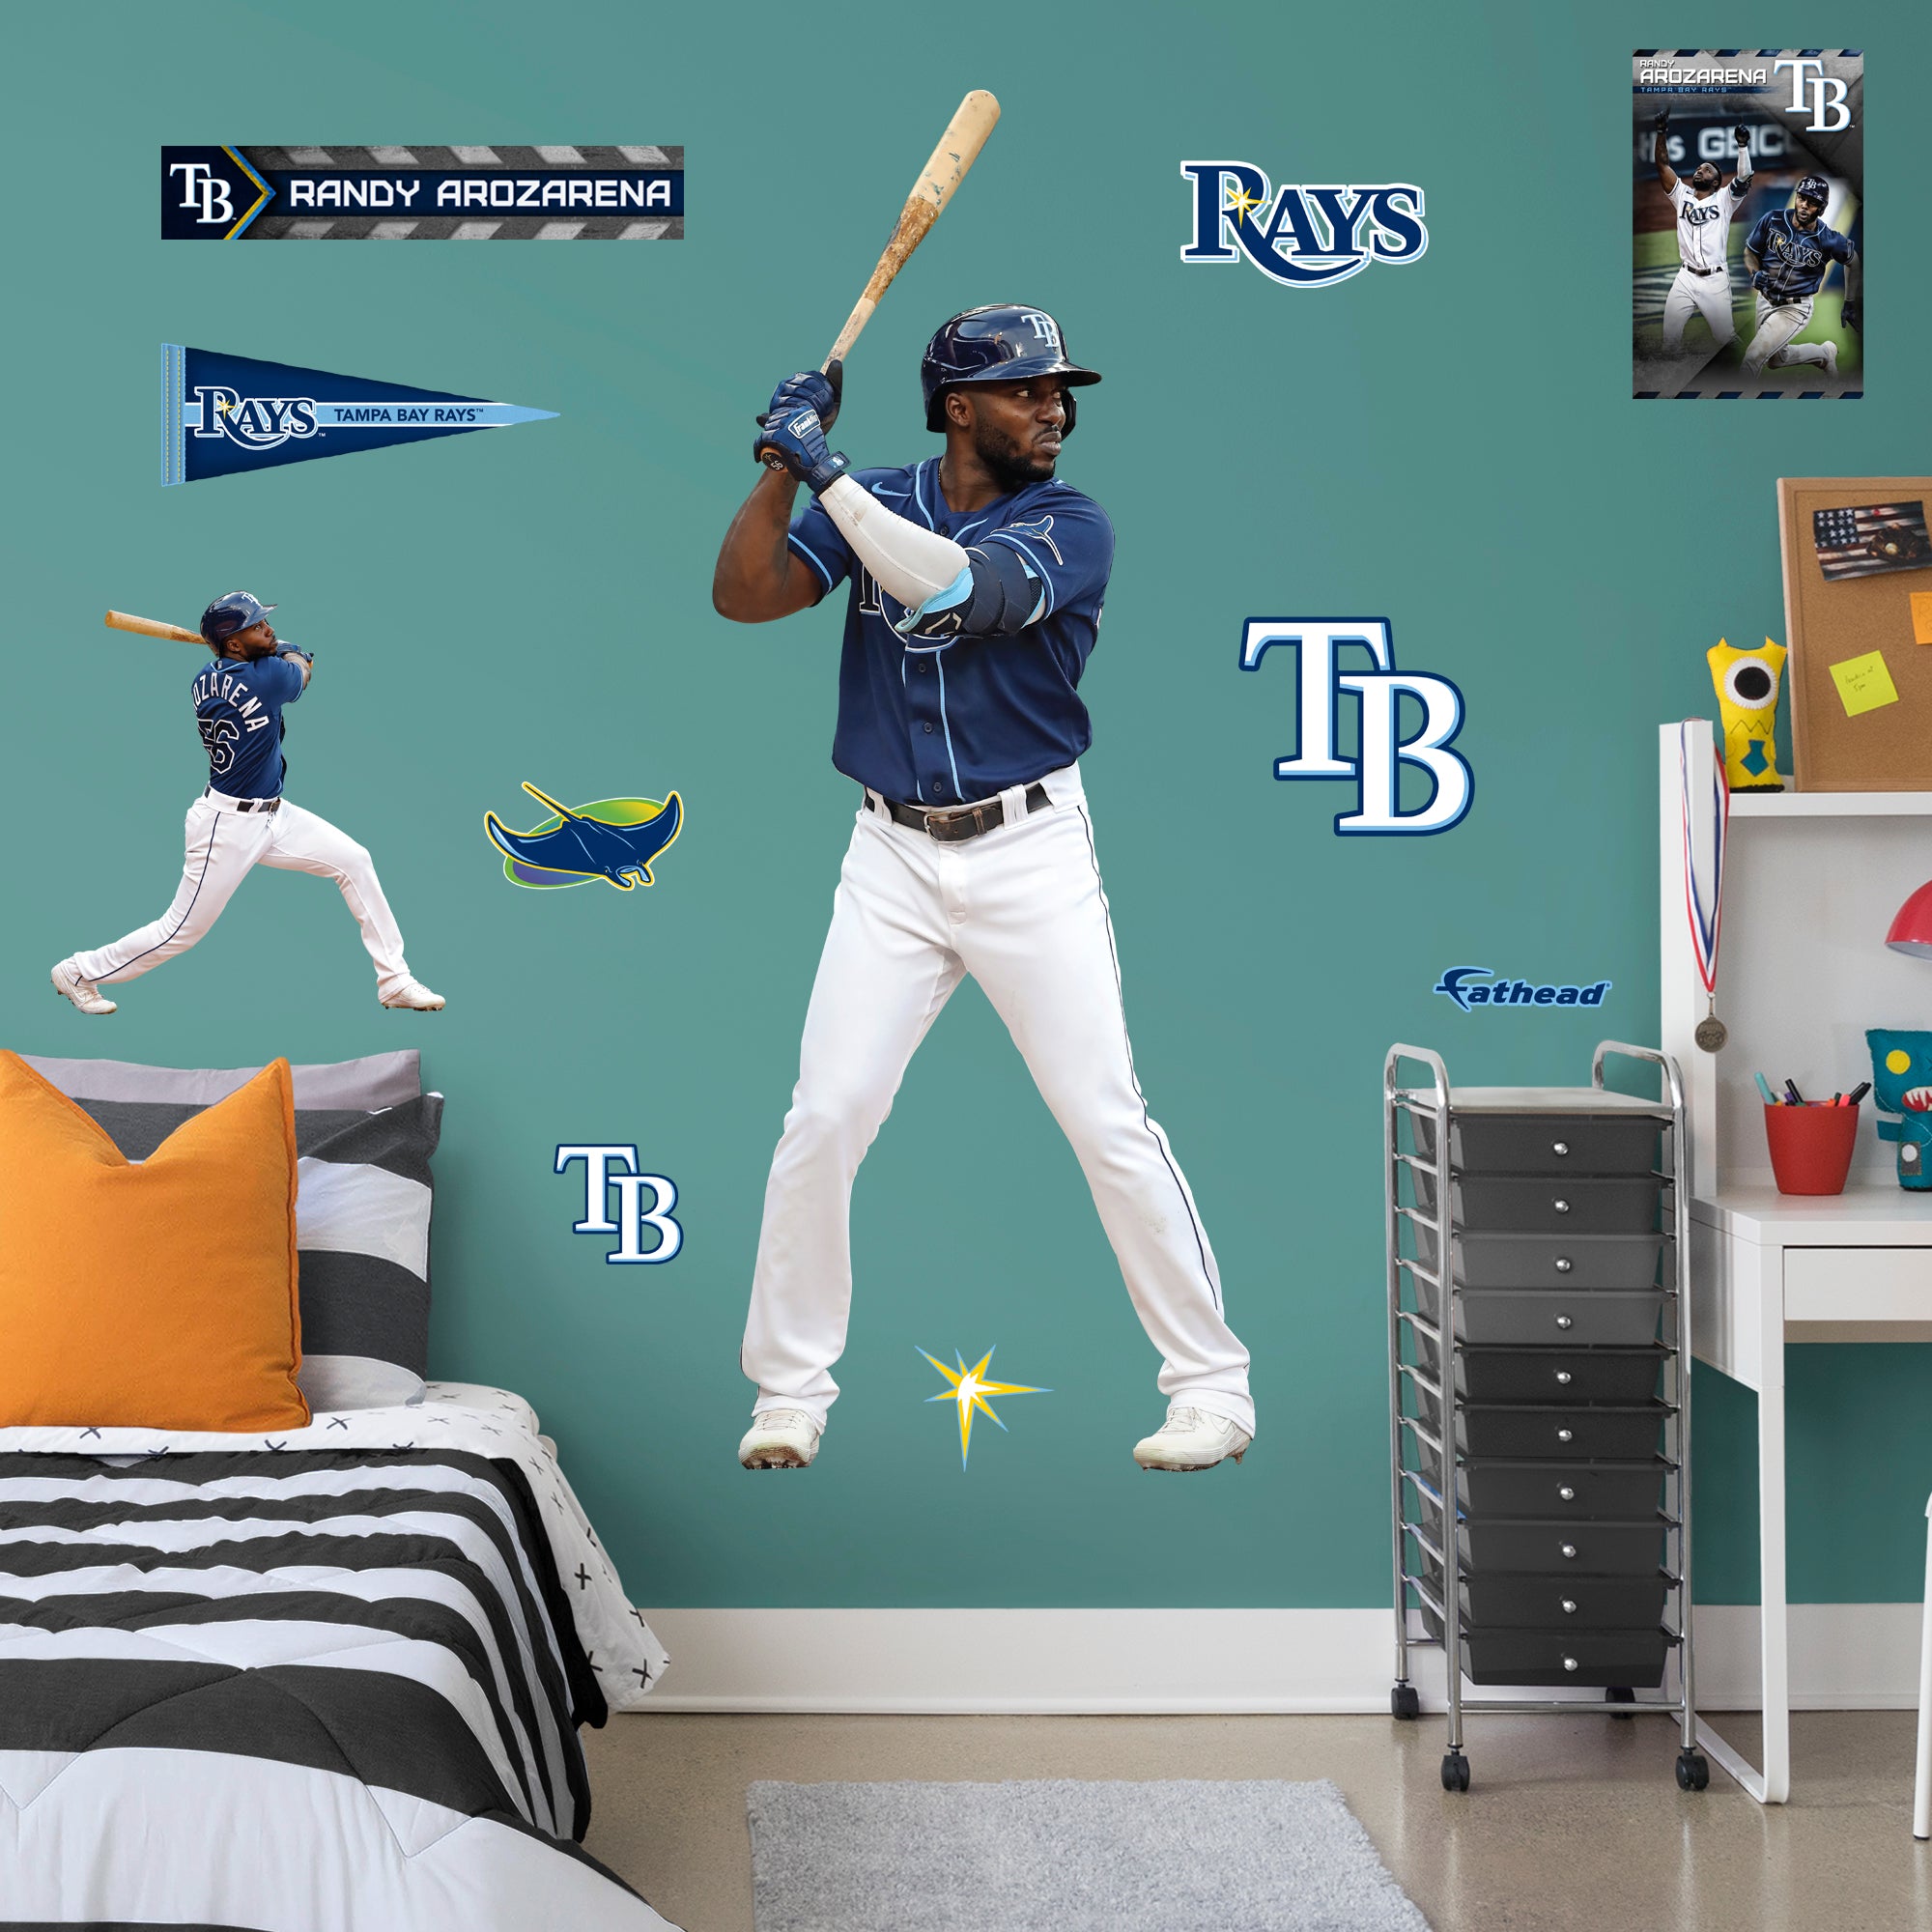 MLB Randy Arozarena 2020 - Officially Licensed NFL Removable Wall Decal Life-Size Athlete + 10 Decals (91"W x 36"H) by Fathead |